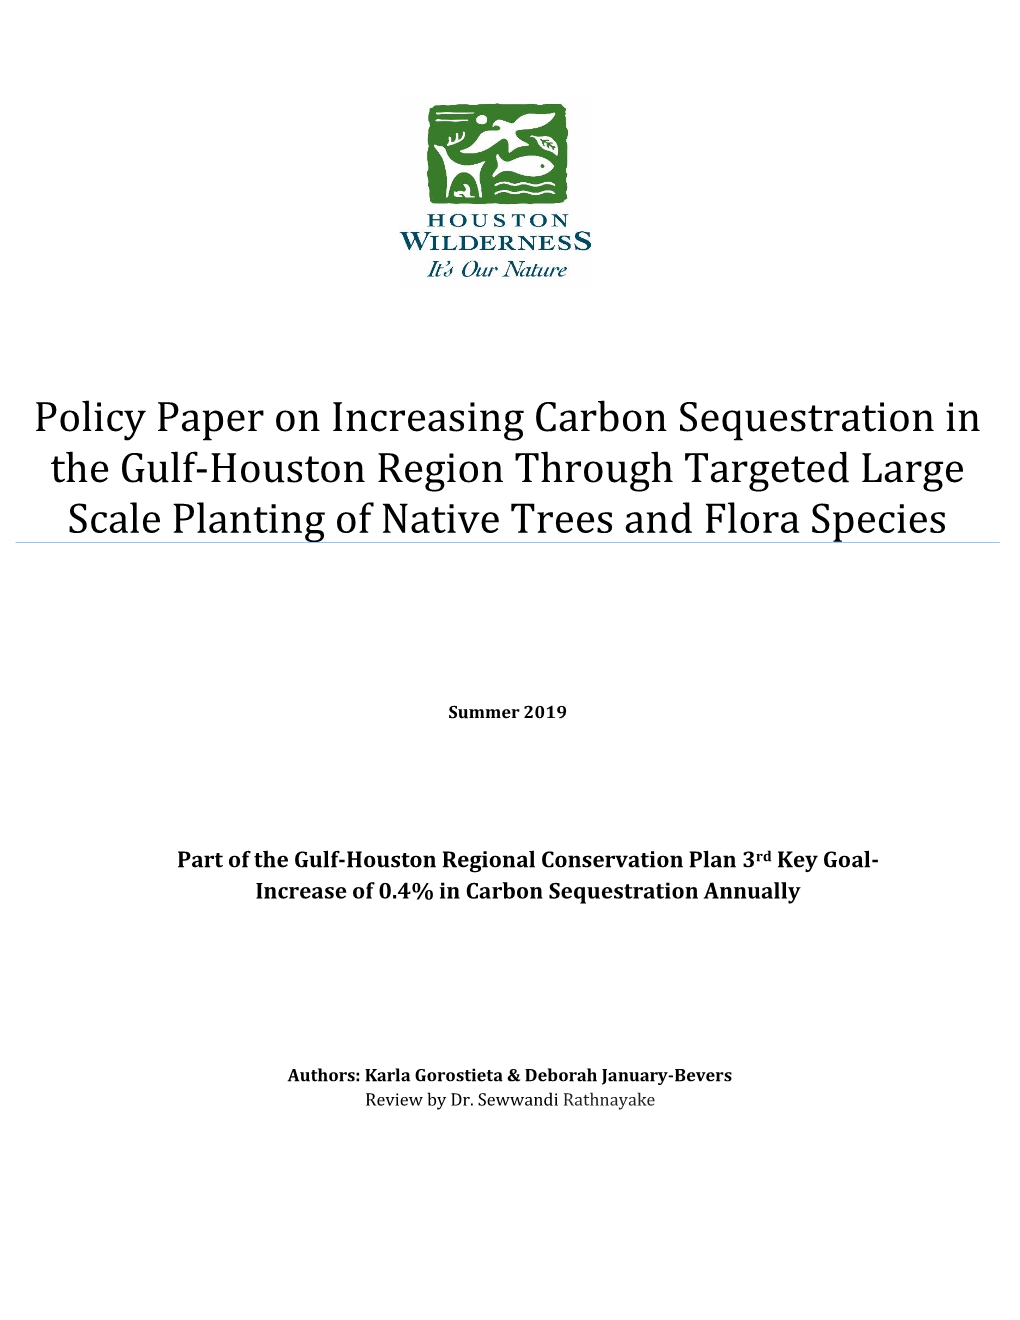 Policy Paper on Increasing Carbon Sequestration in the Gulf-Houston Region Through Targeted Large Scale Planting of Native Trees and Flora Species